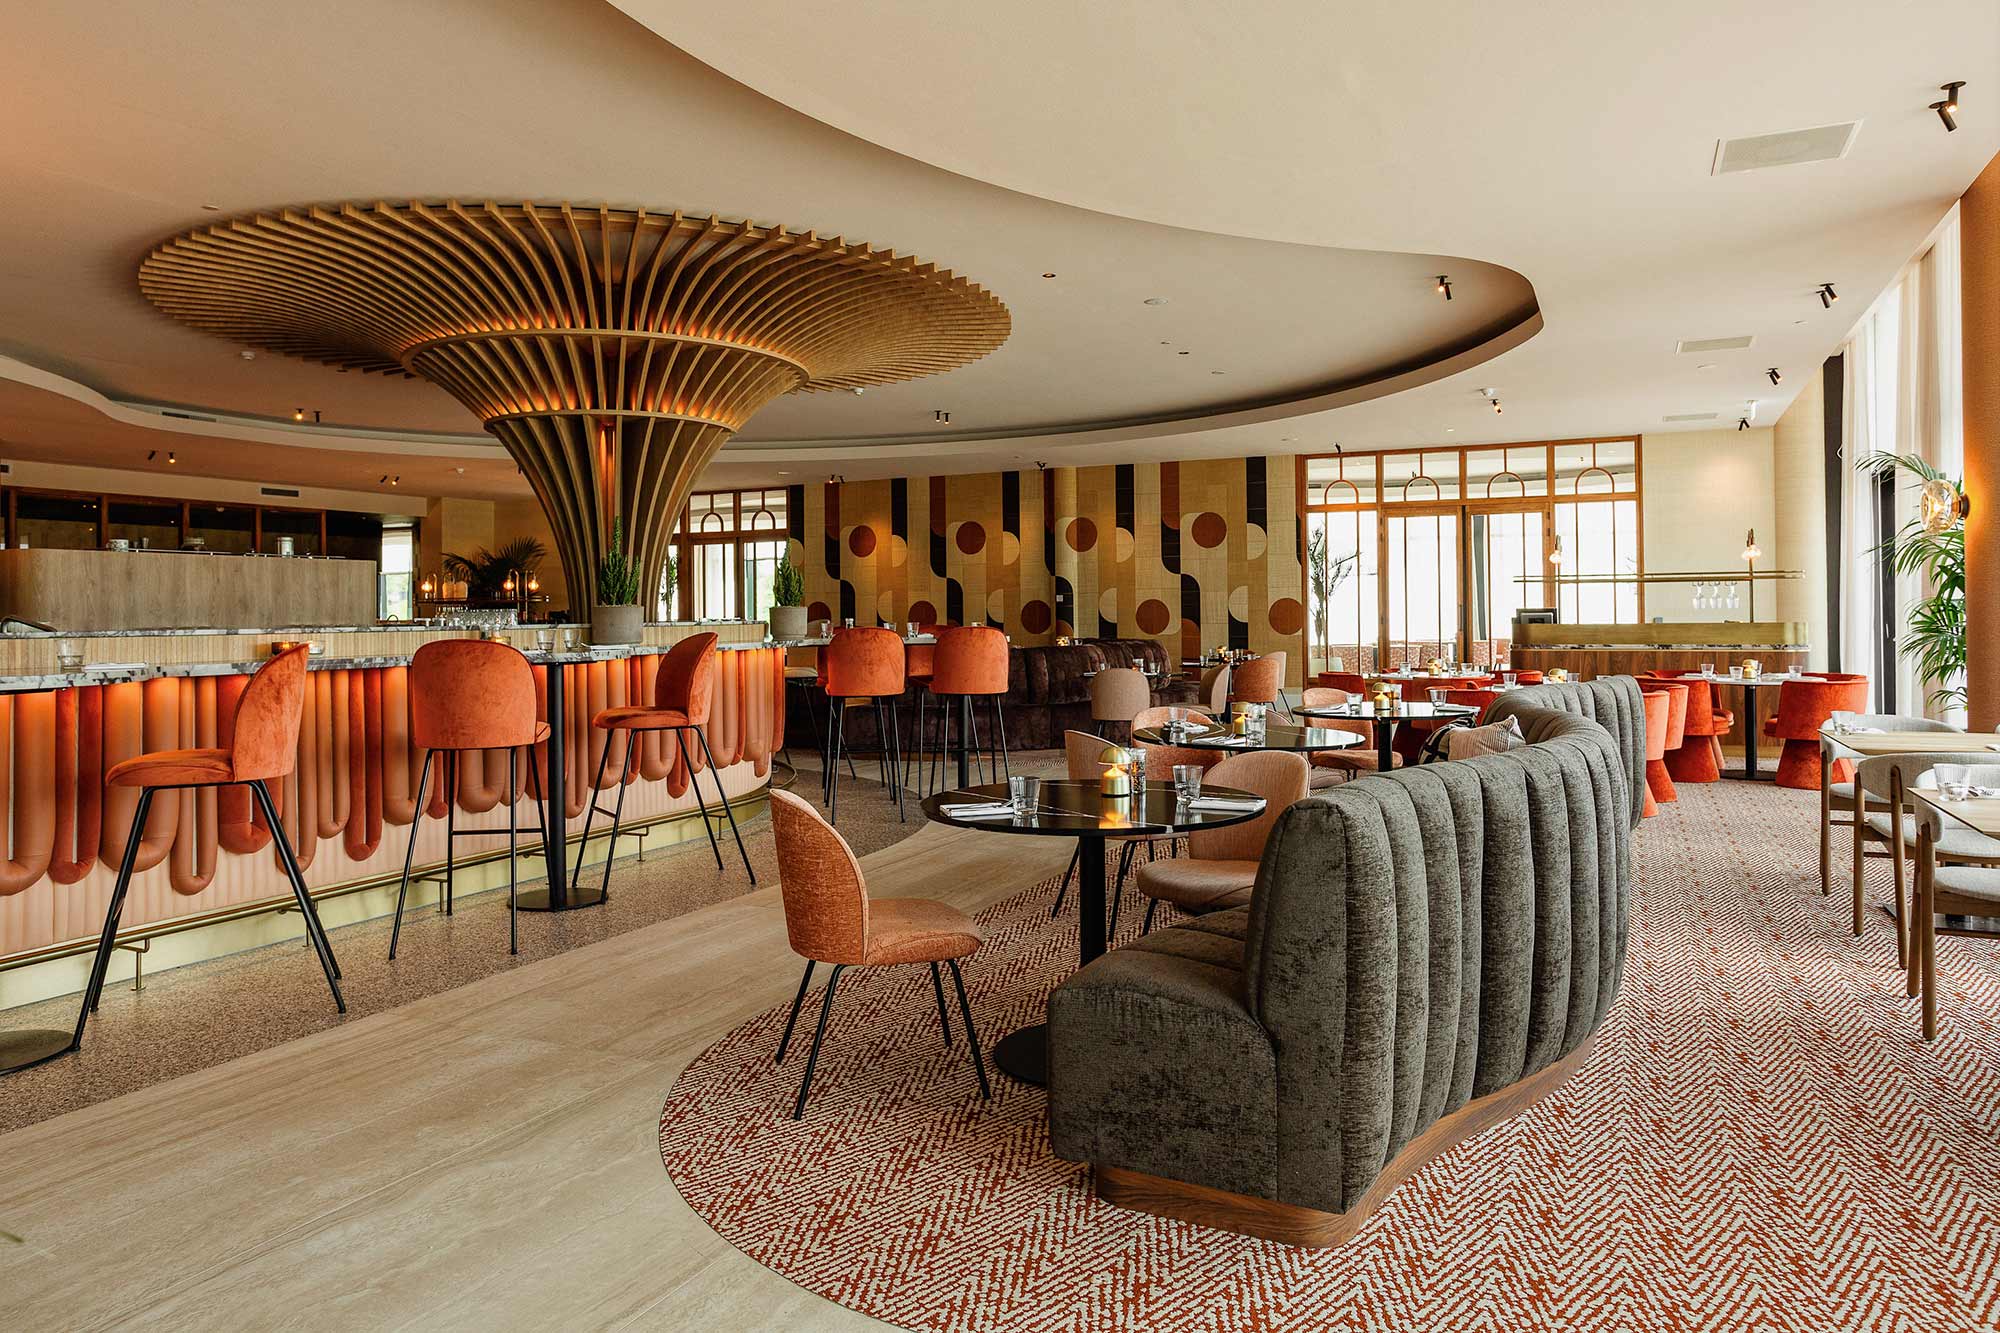 Image of VanderValkEindhoven 18 in Inspiration boost: Surprising color combinations in Hotel Valk Best - Cosentino